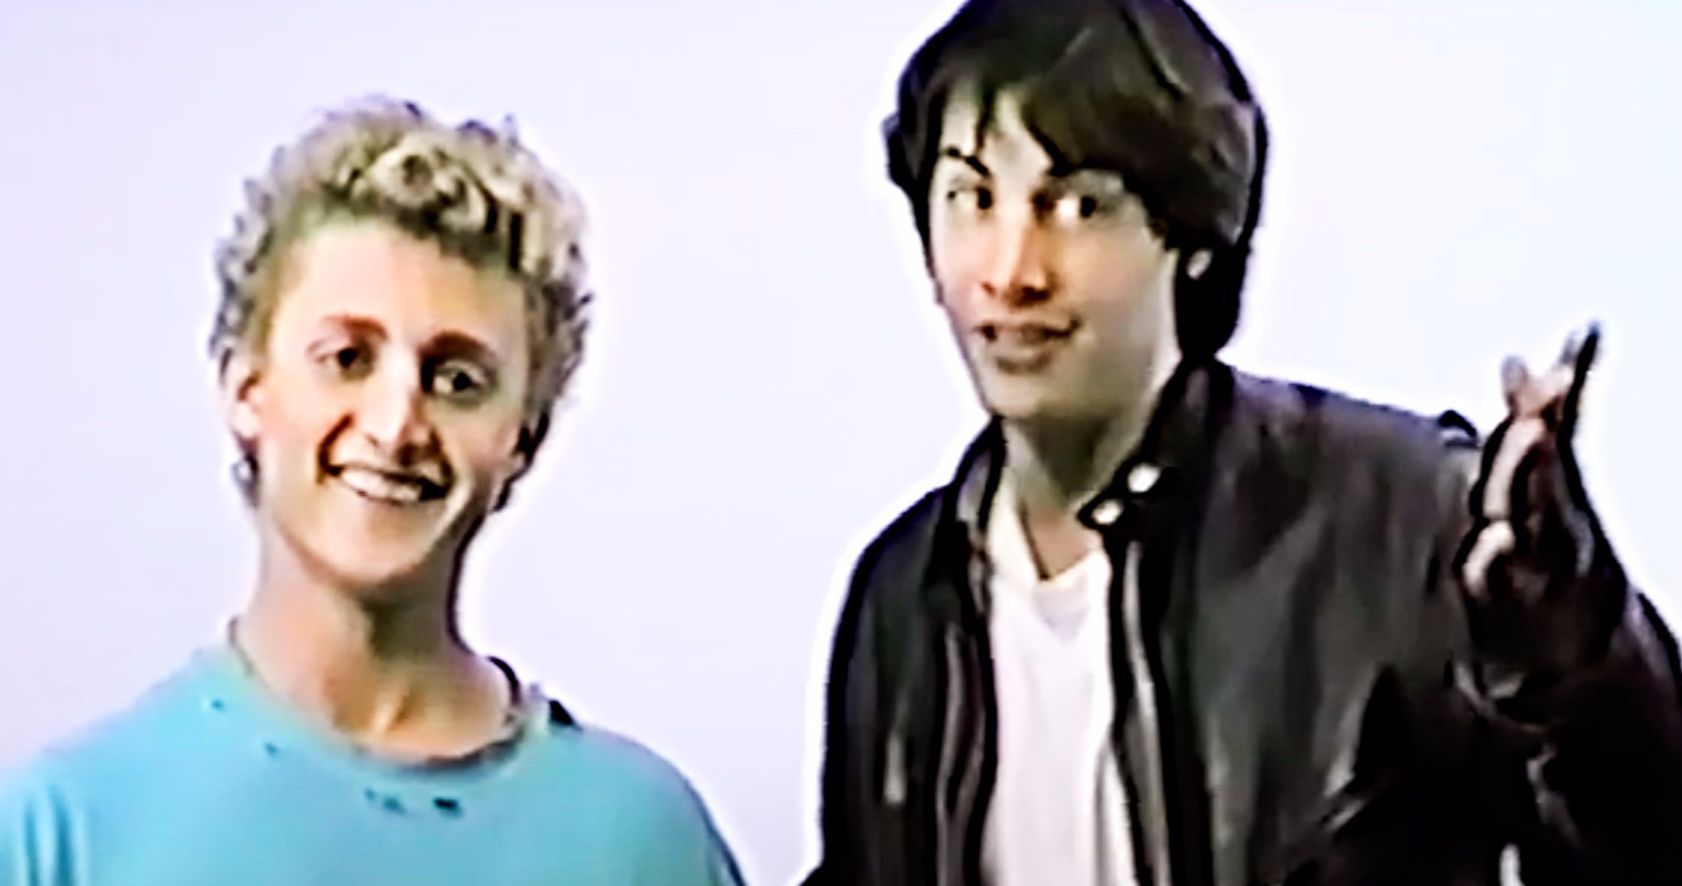 Watch Bill &amp; Ted's Excellent Audition Video with Keanu Reeves and Alex Winter